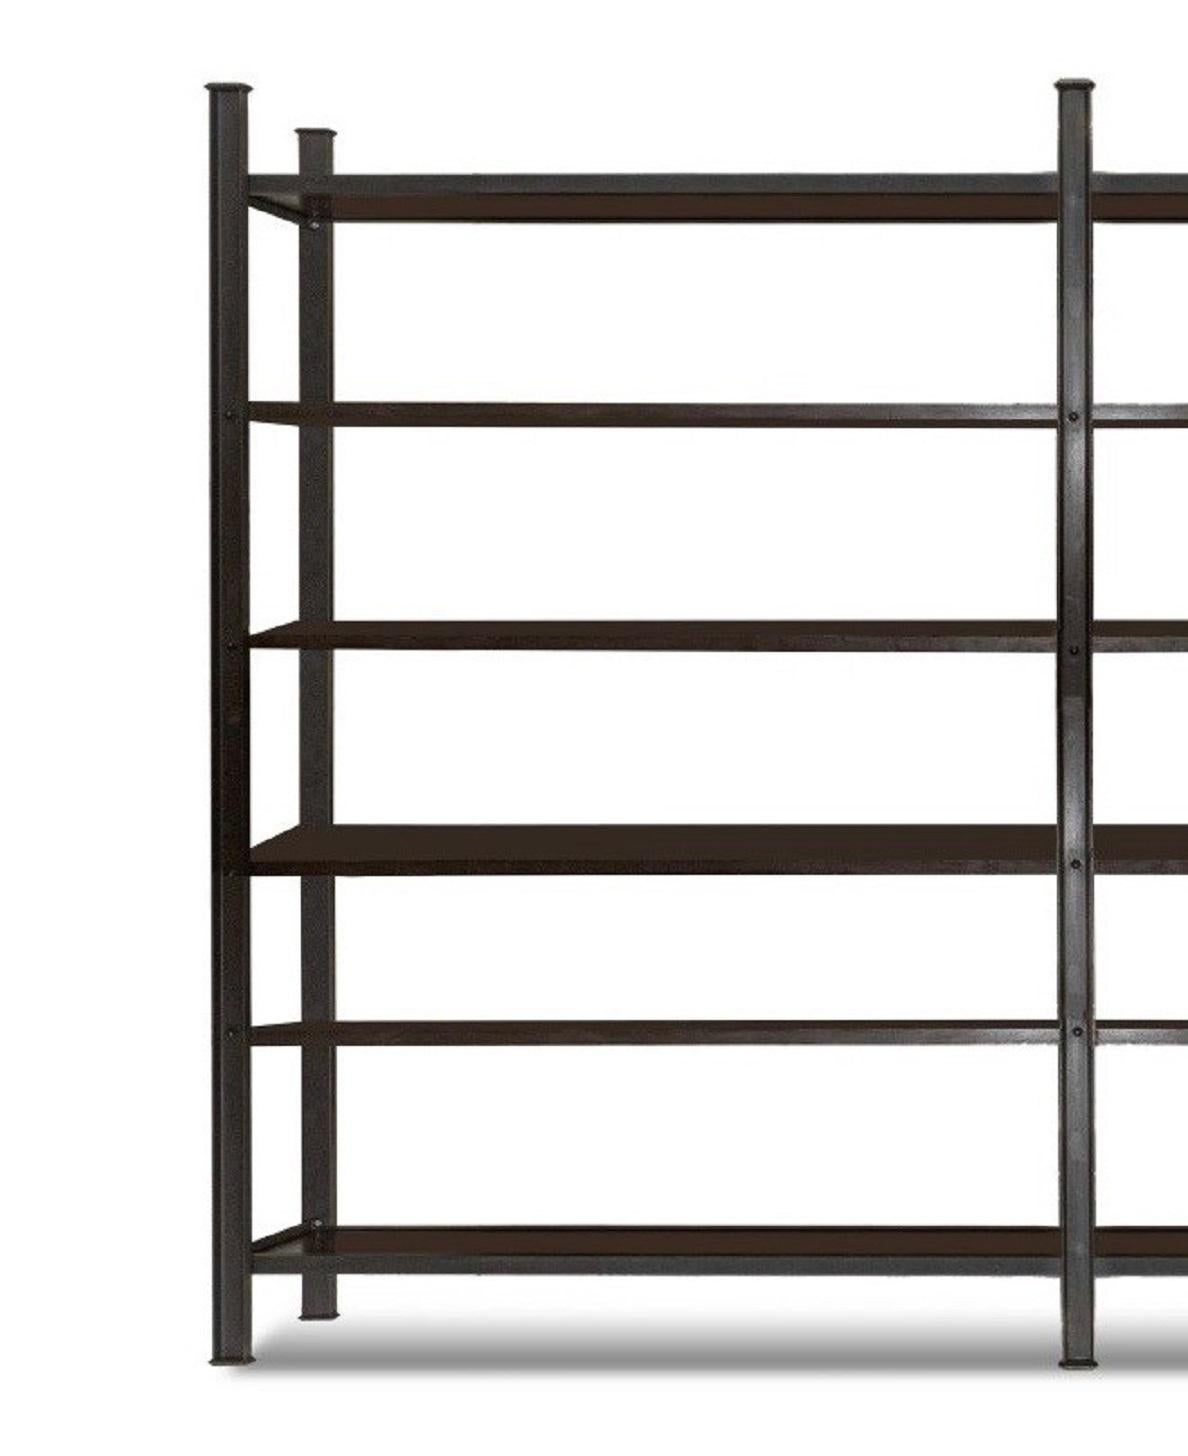 A Steel and Wood Double Width Bookshelf.

Features a dark bronze finish with six fixed dark brown wood shelves complemented by stylized caps on the feet and top posts. 

Dimensions: Each shelf is approx. 15